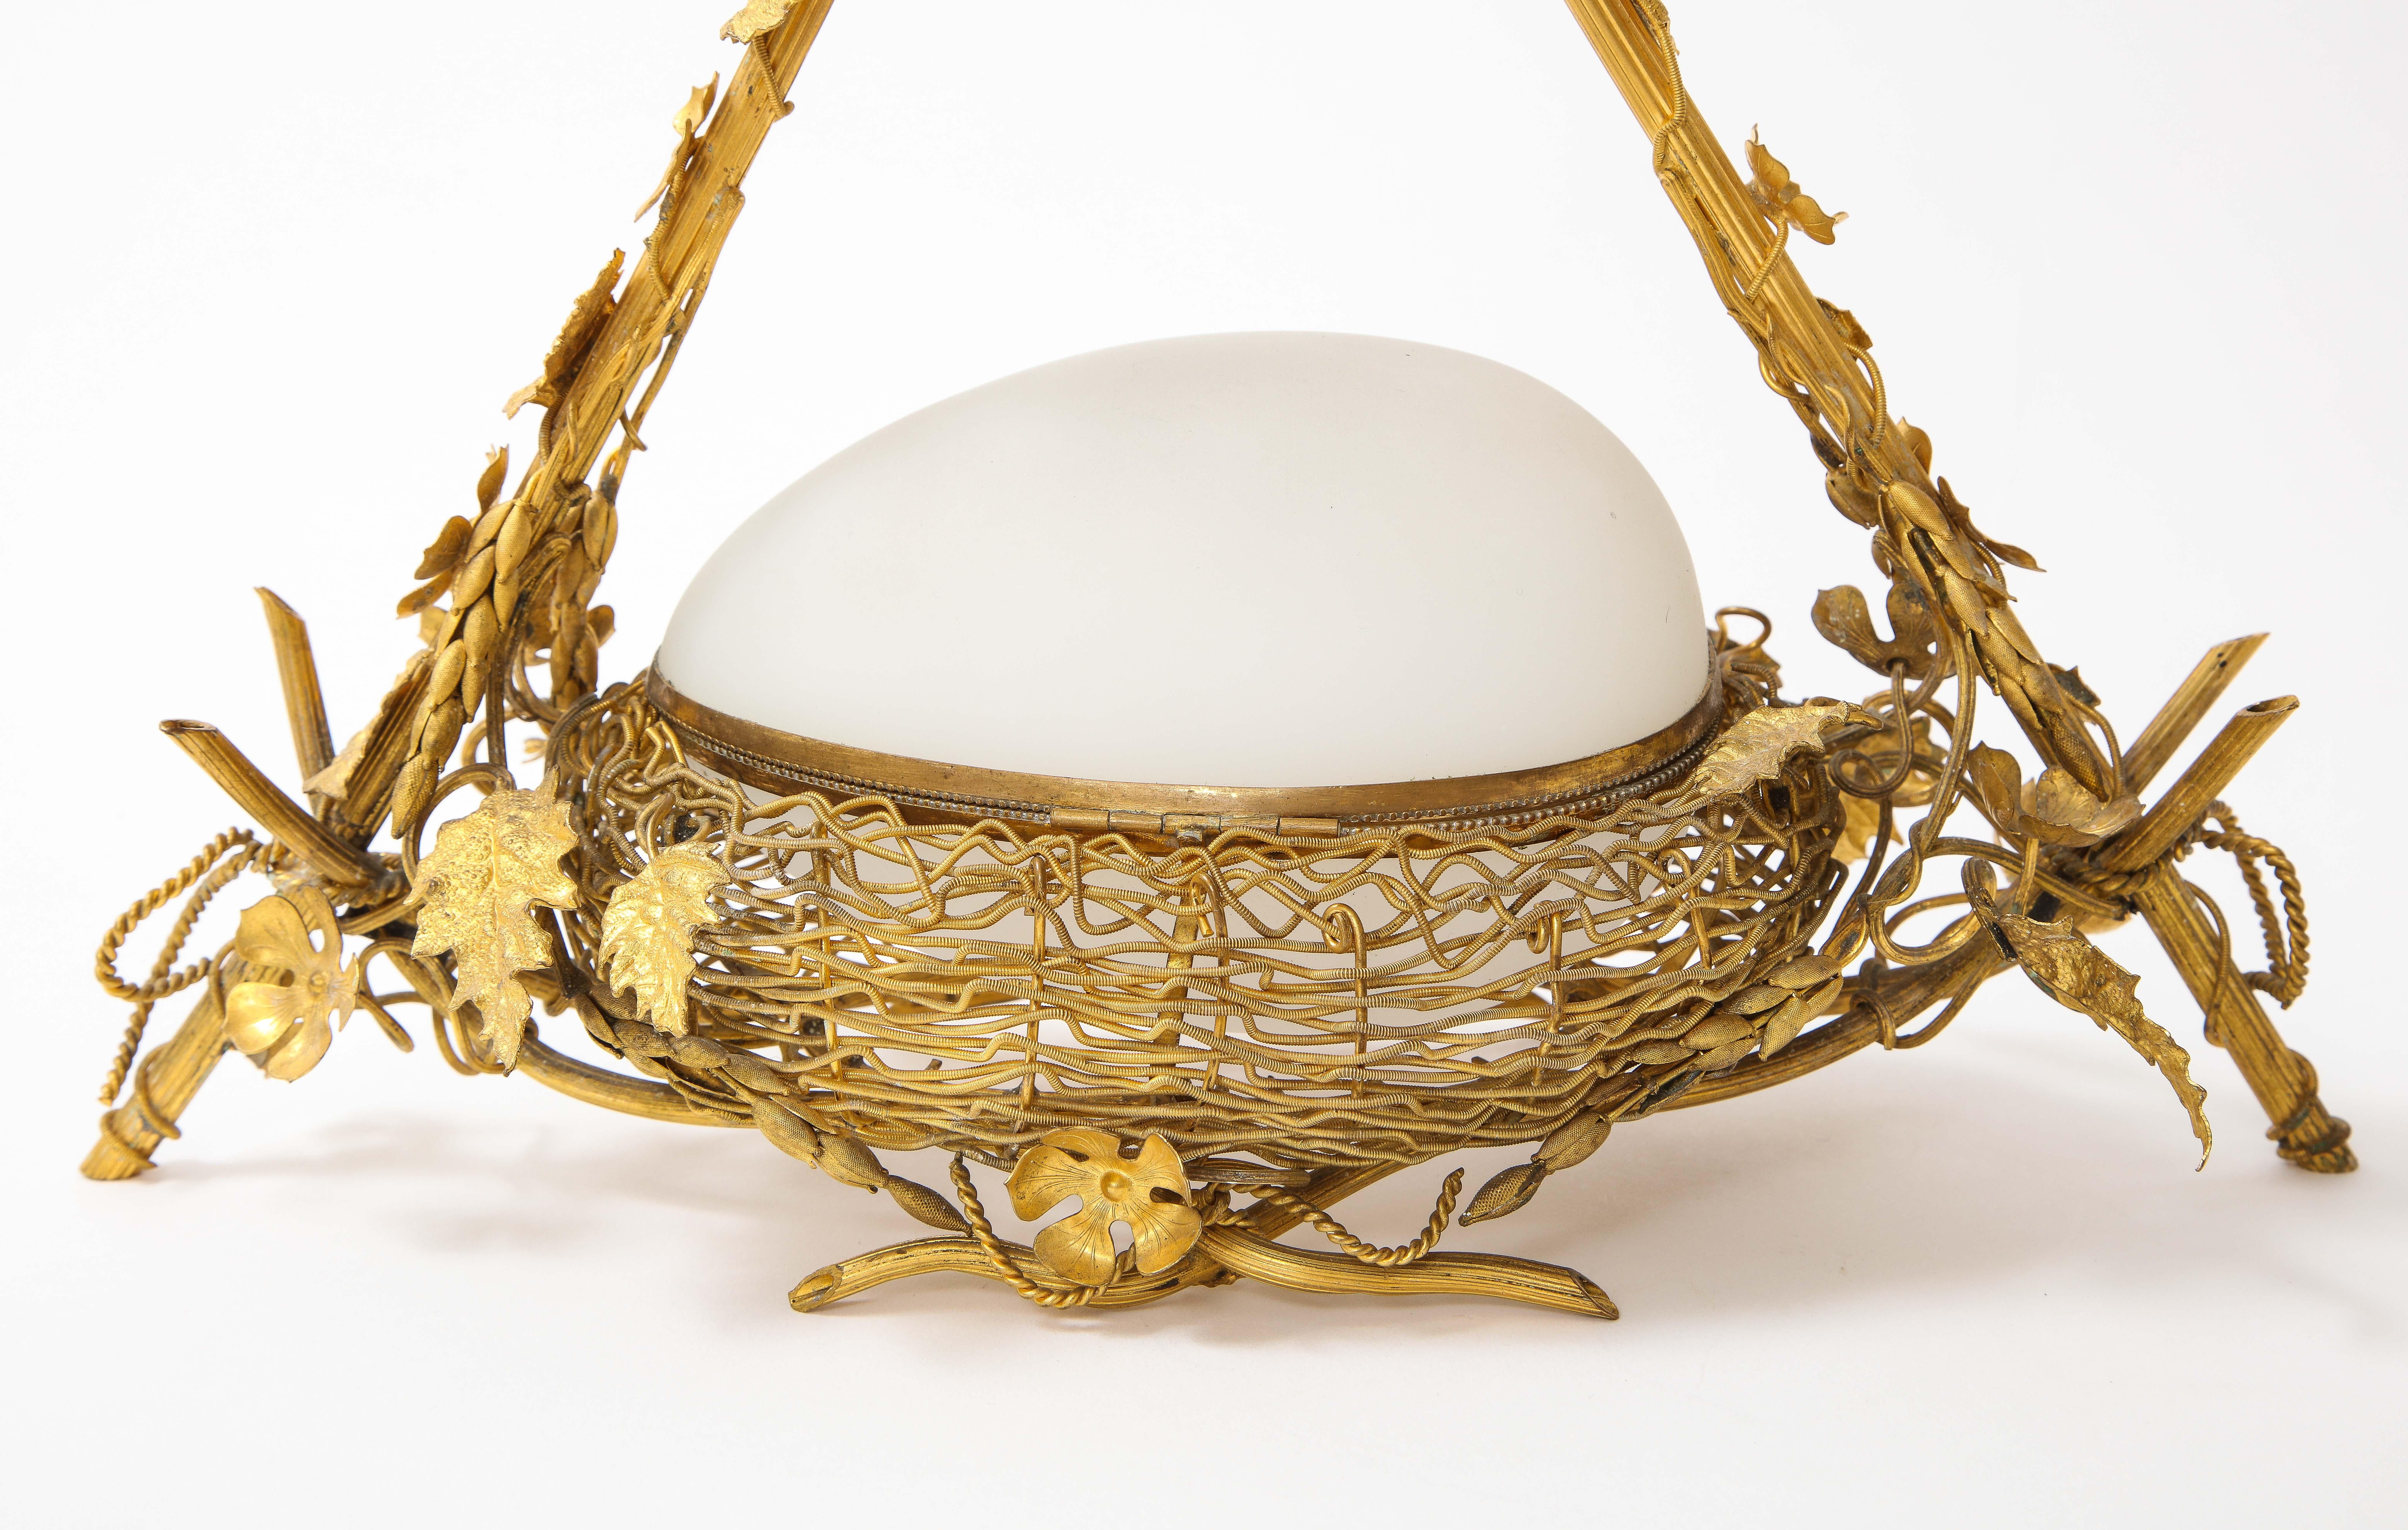 A 19th C. French Dore Bronze Mounted White Opaline Egg Form Covered Nesting Box For Sale 4